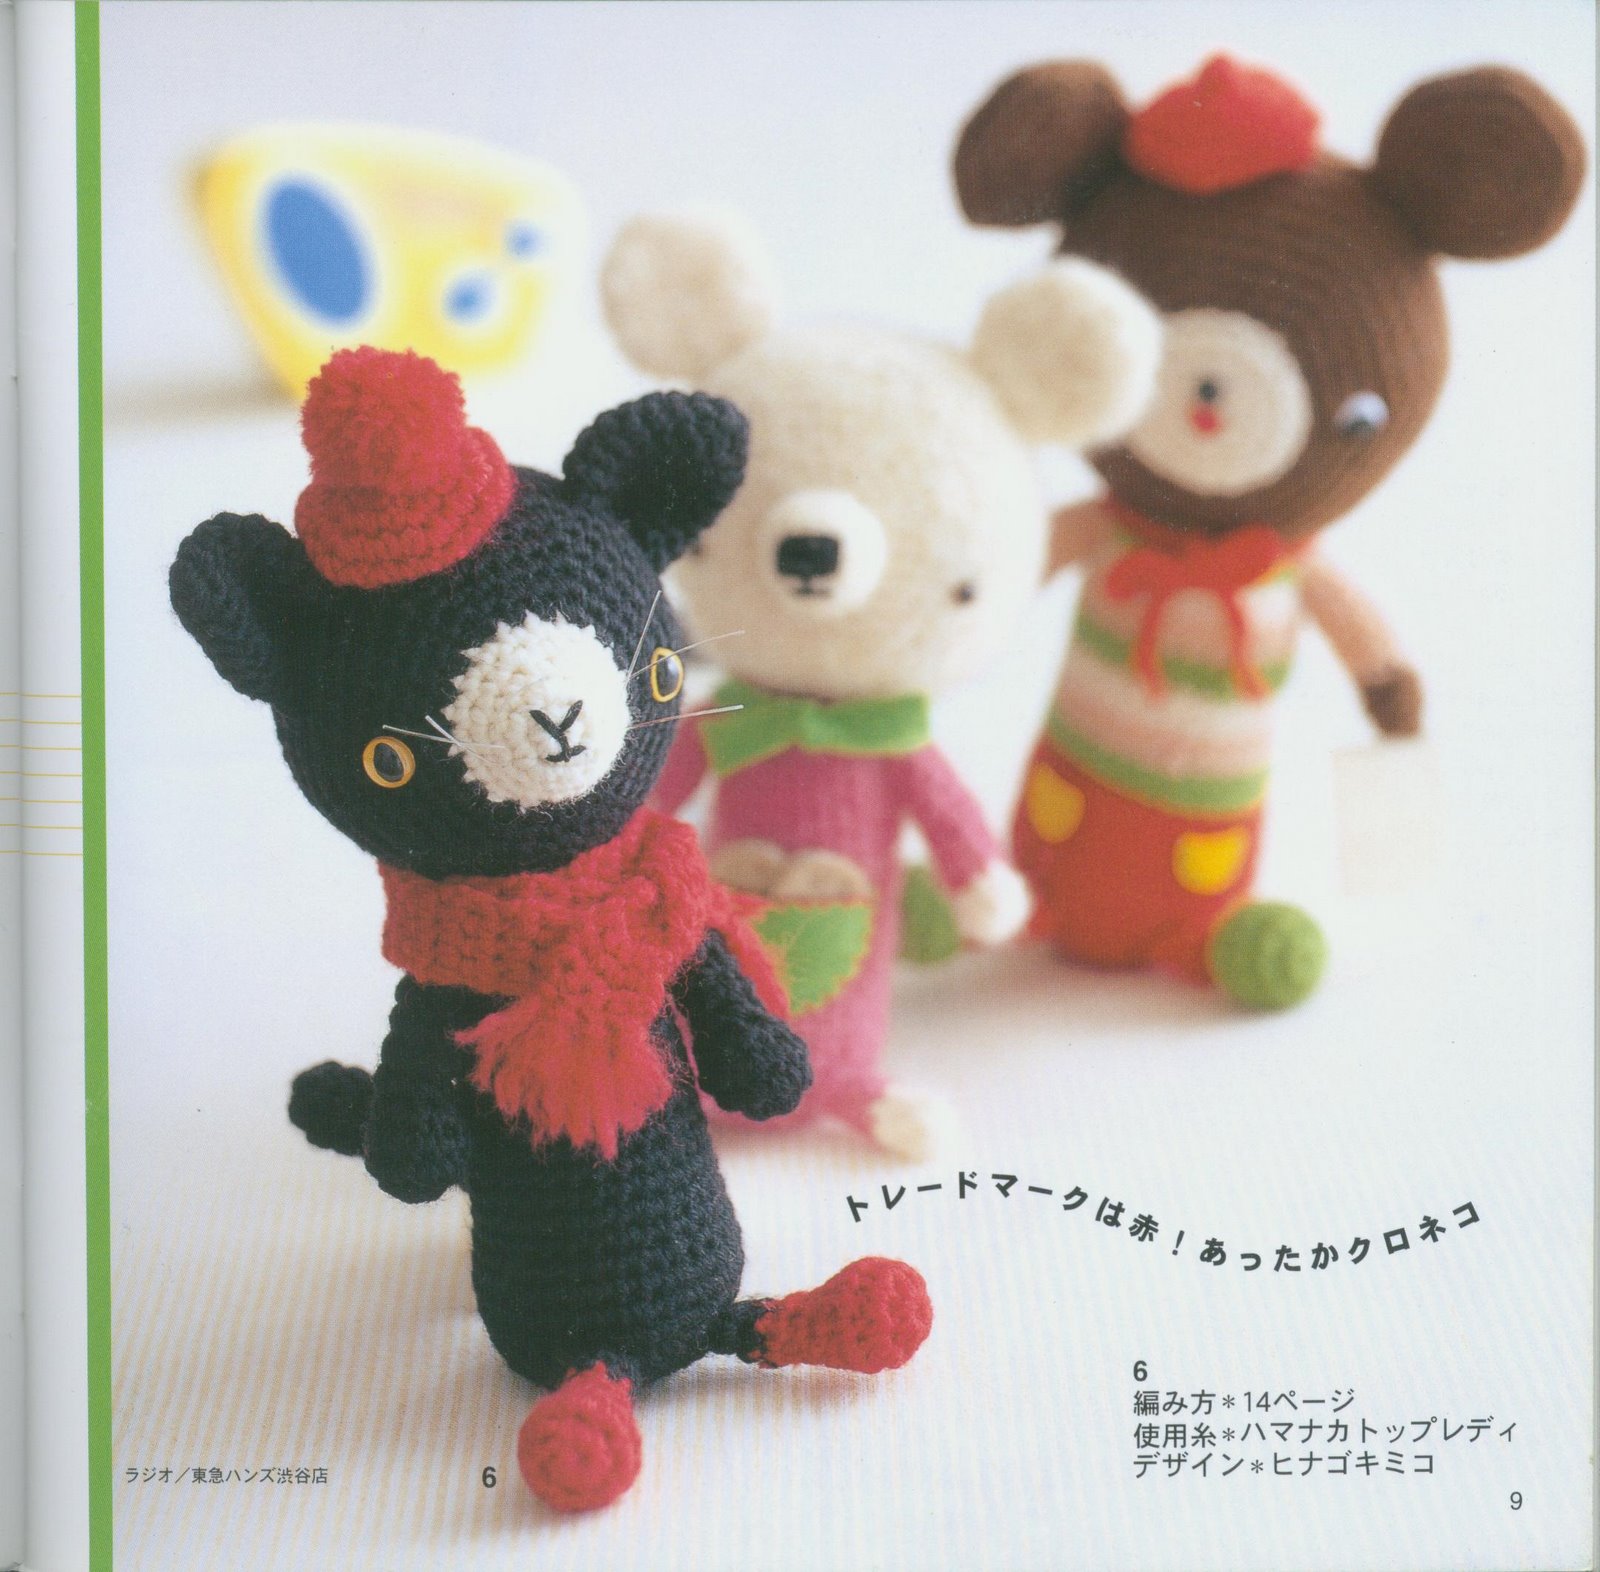 Black cat with hat and scarf amigurumi pattern (1)